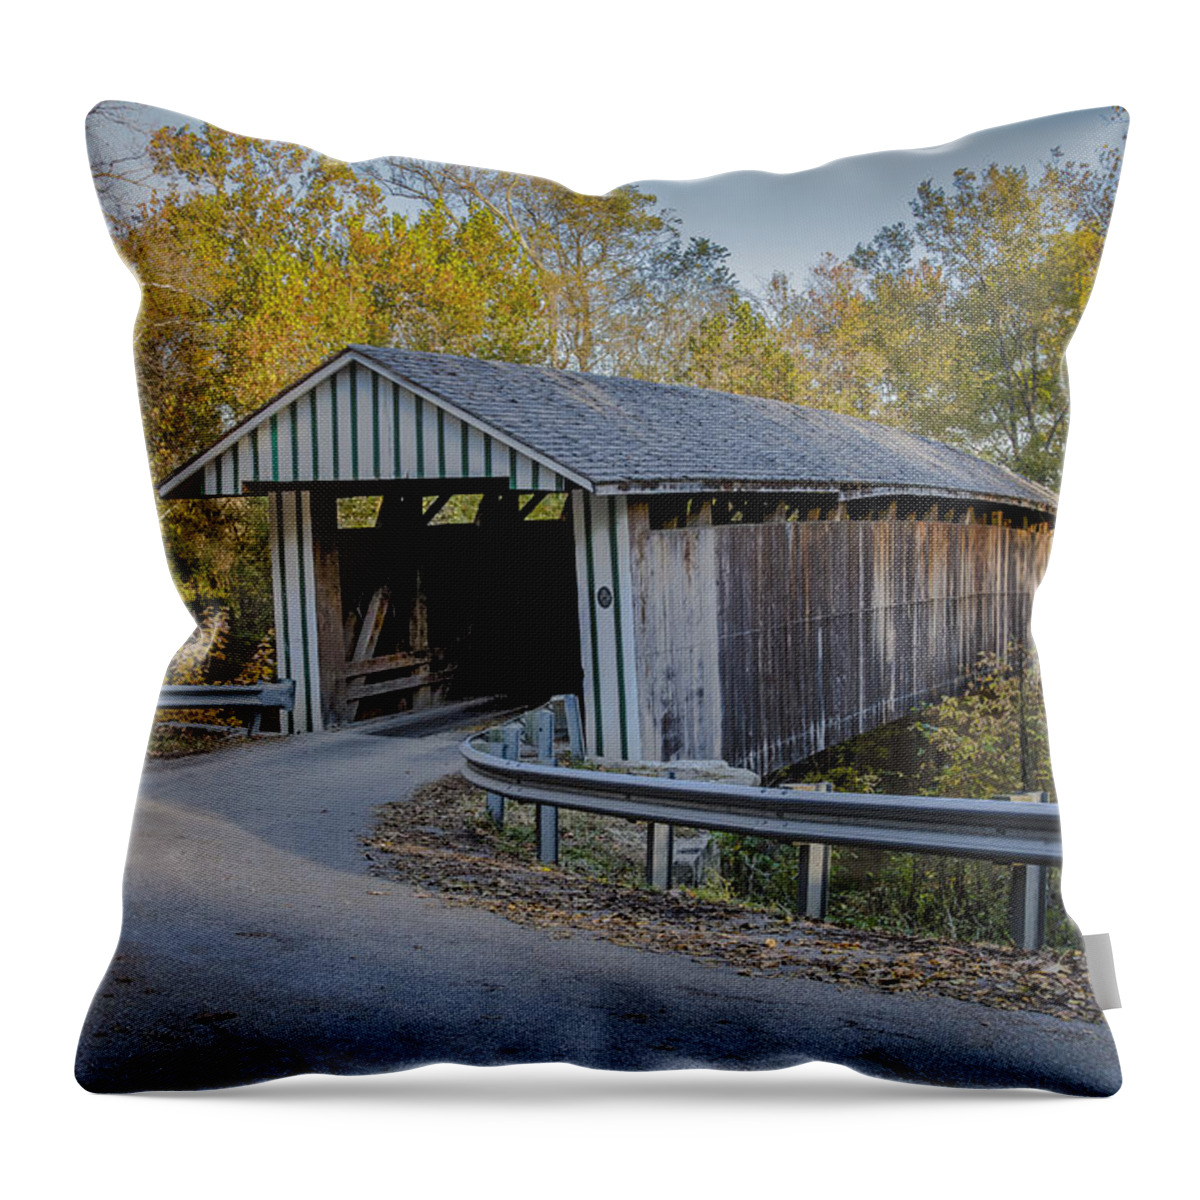 America Throw Pillow featuring the photograph Colville Covered Bridge by Jack R Perry